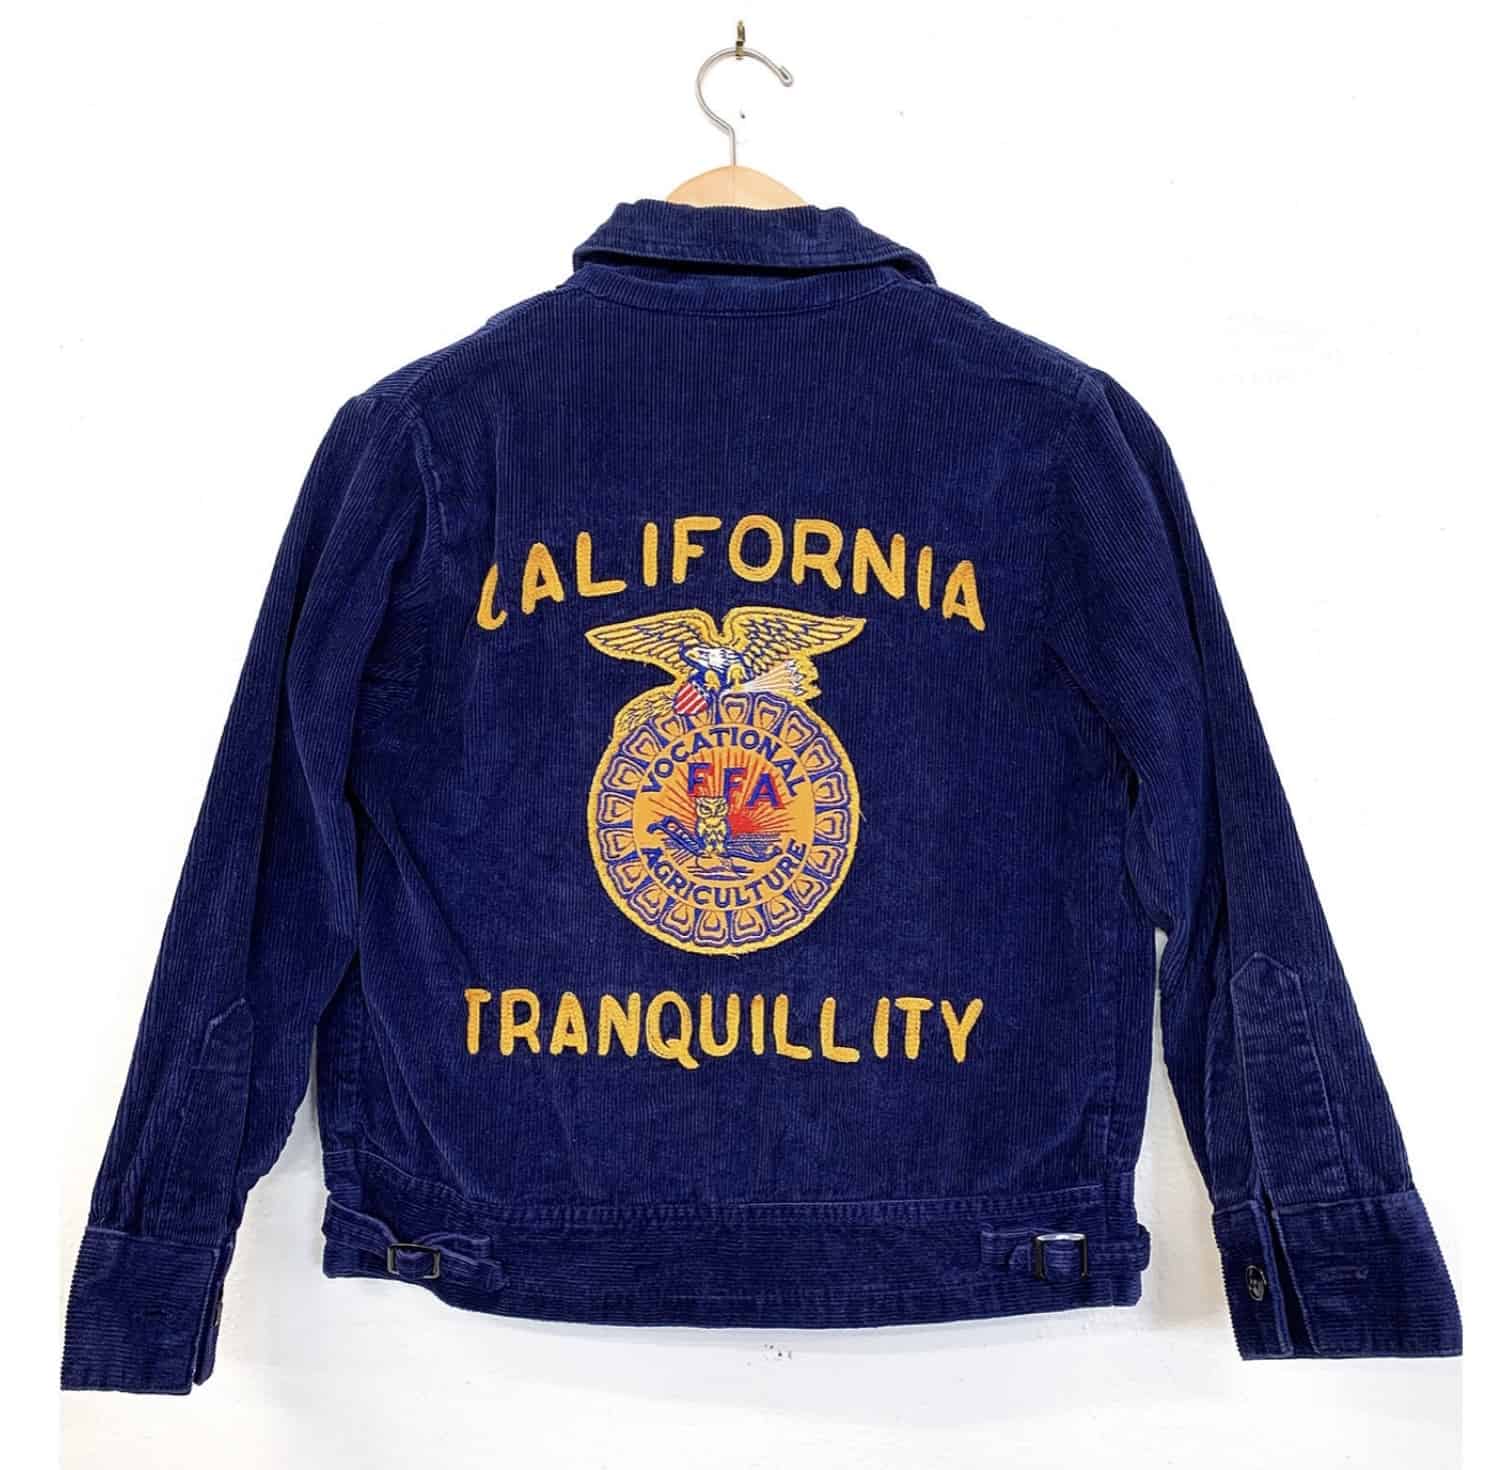 The back of Sutro's FFA jacket as it appeared in the Urban Outfitters online catalog.